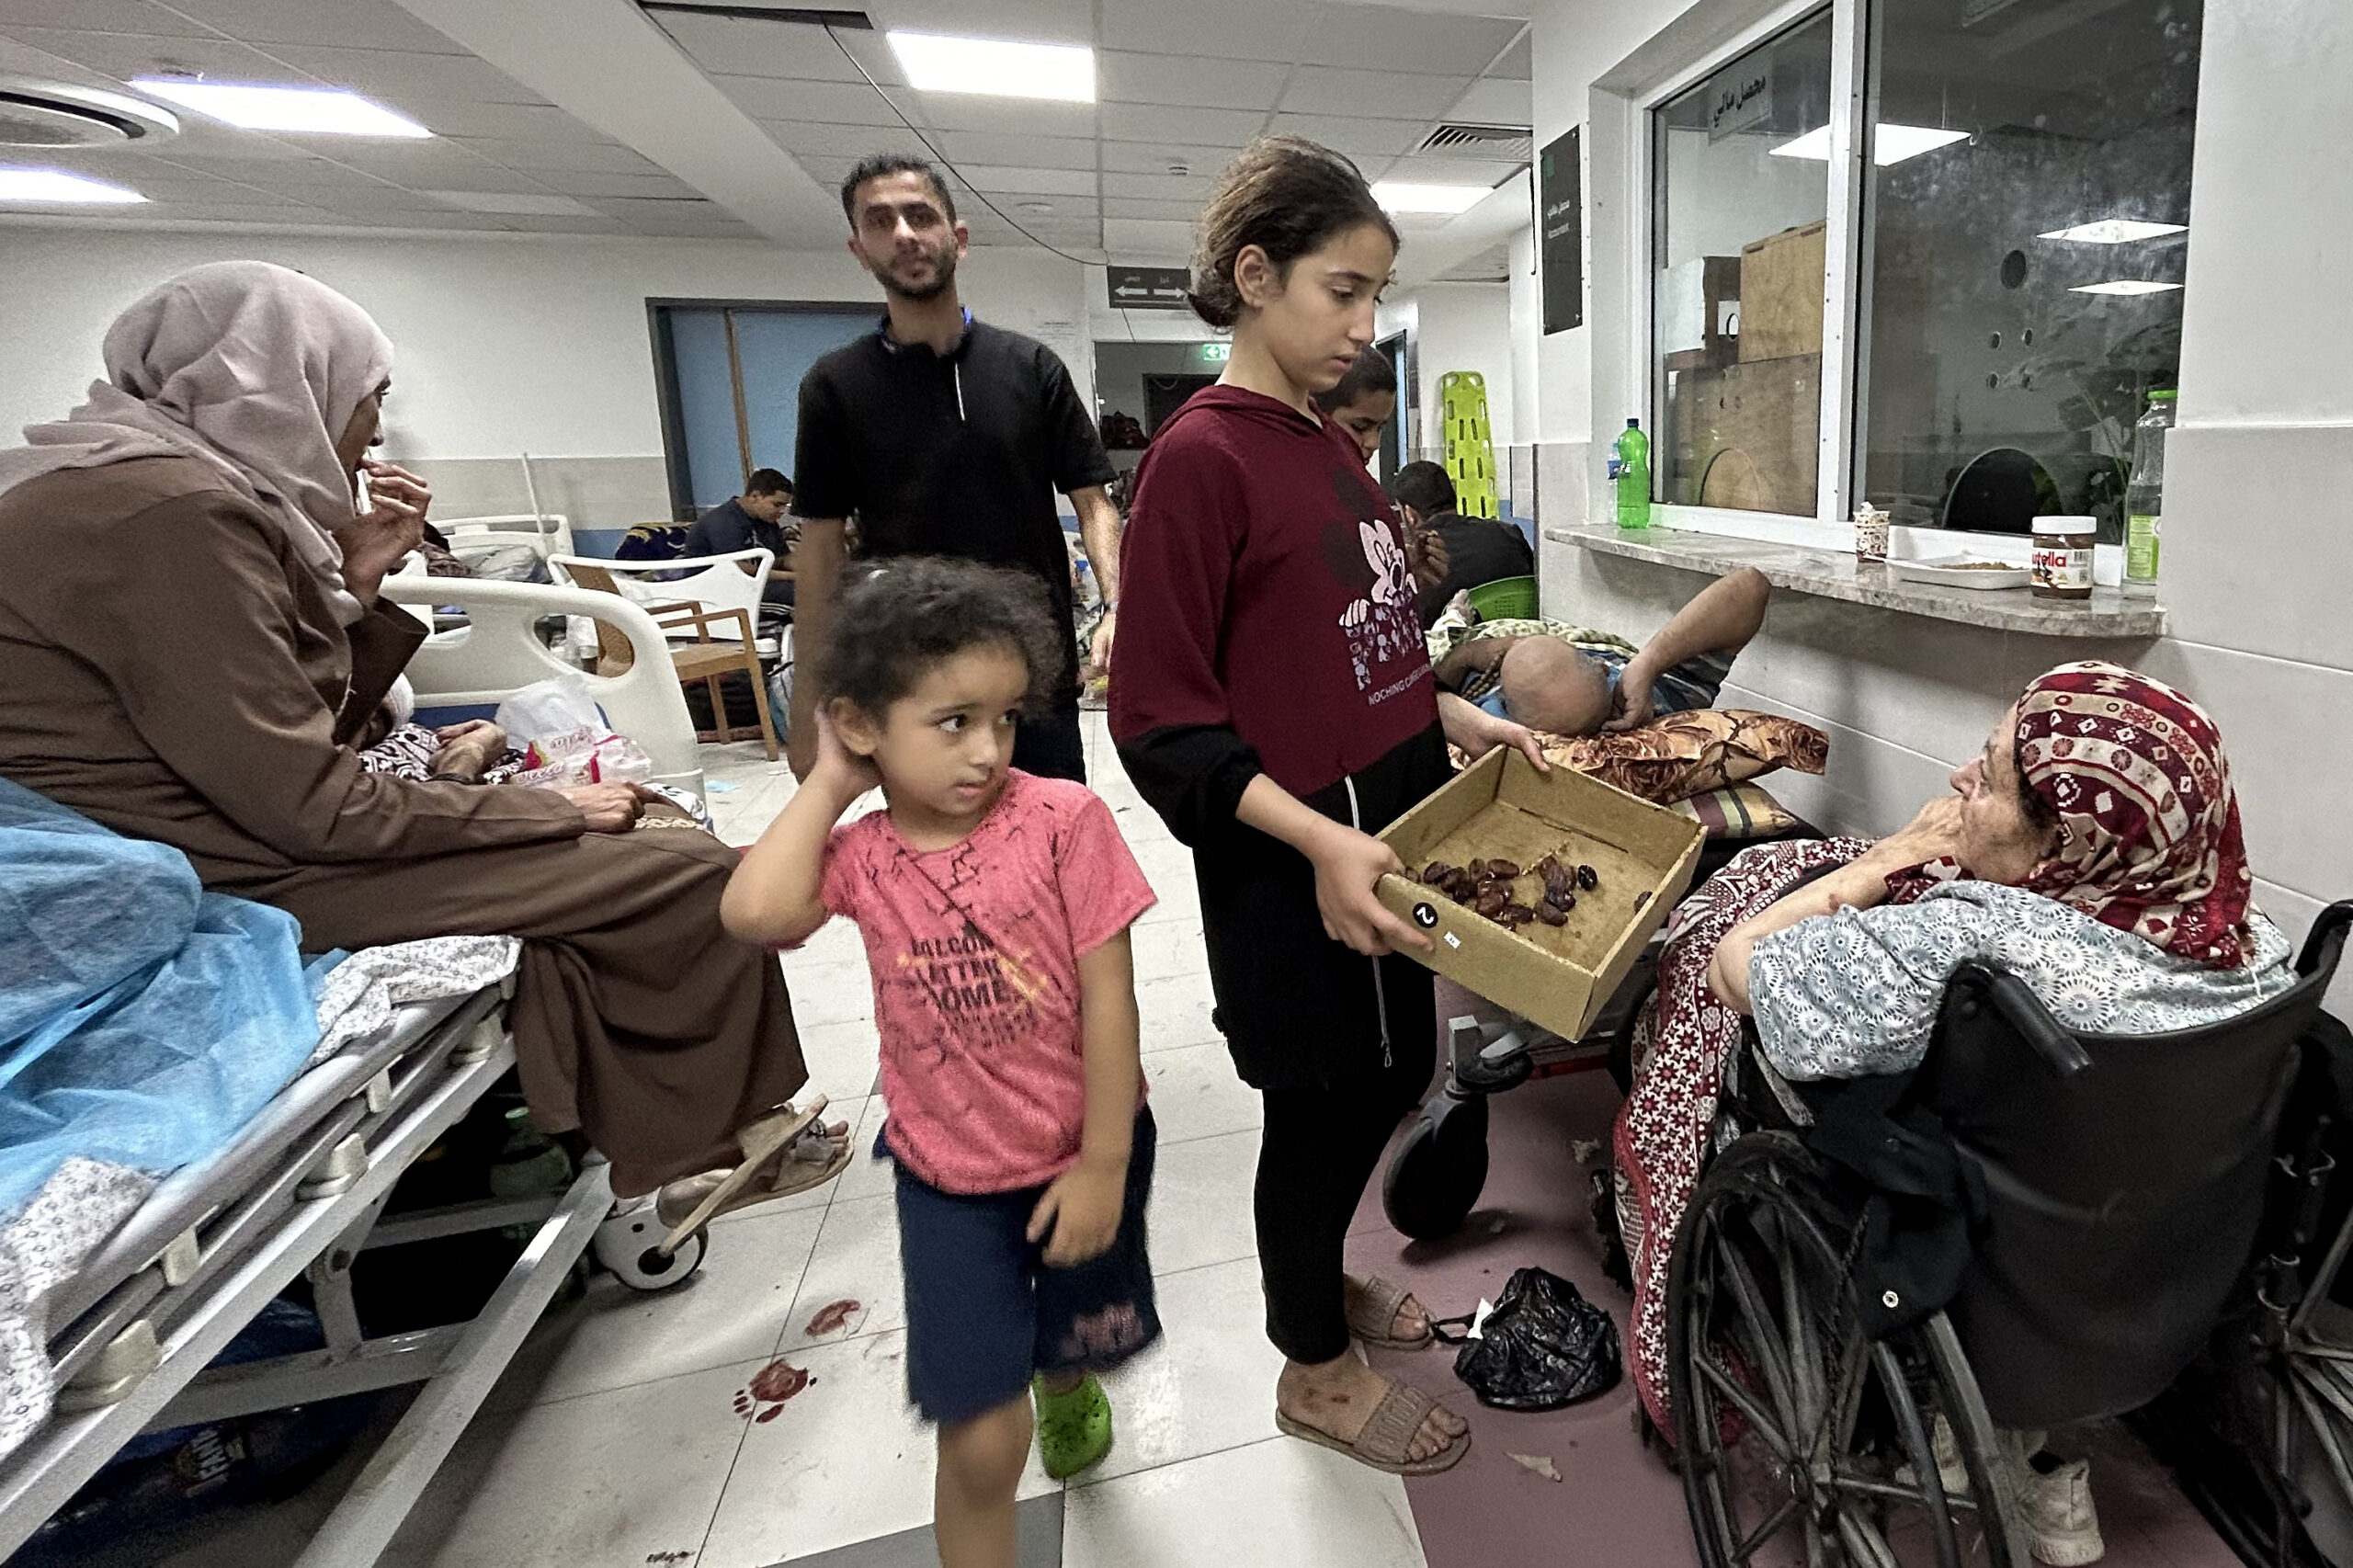 PALESTINIAN-ISRAEL-CONFLICT-HOSPITAL